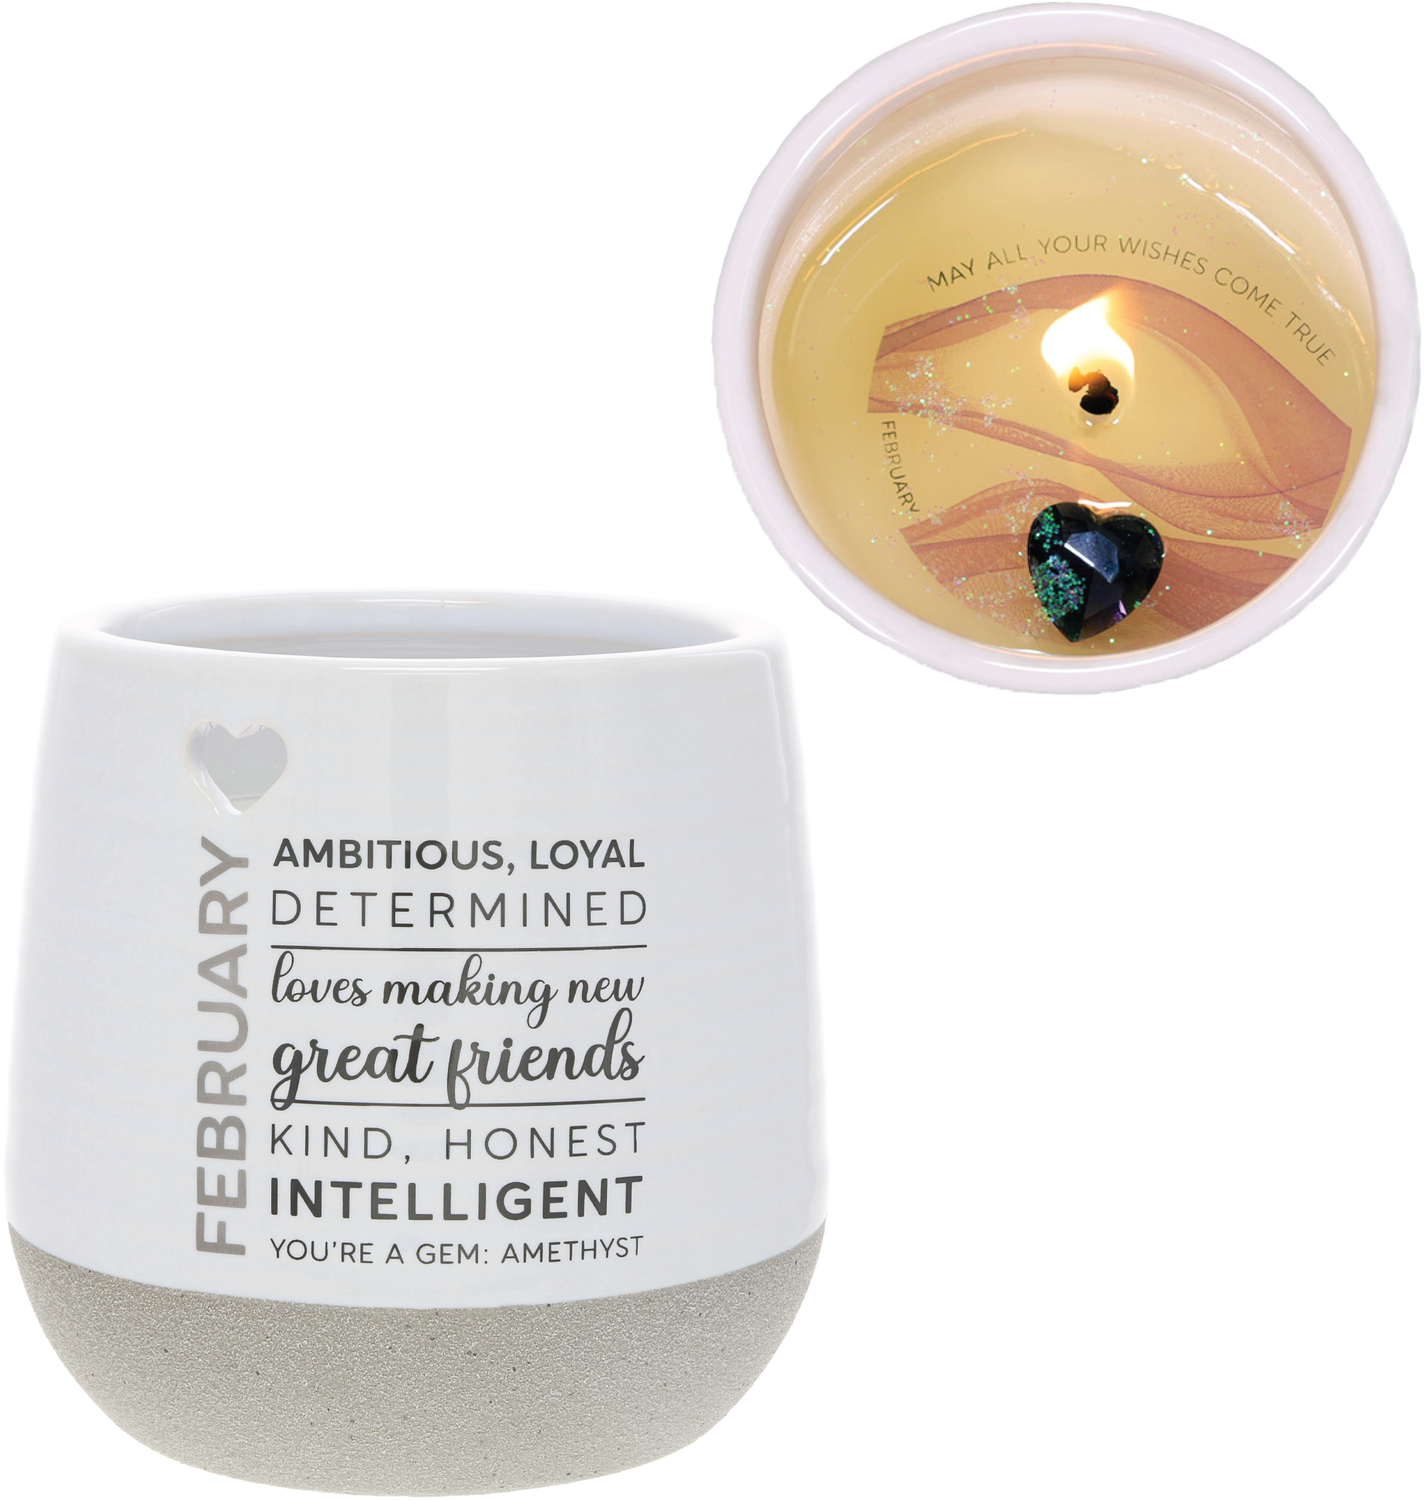 February by You Are a Gem - February - 11 oz - 100% Soy Wax Reveal Candle with Birthstone Scent: Tranquility